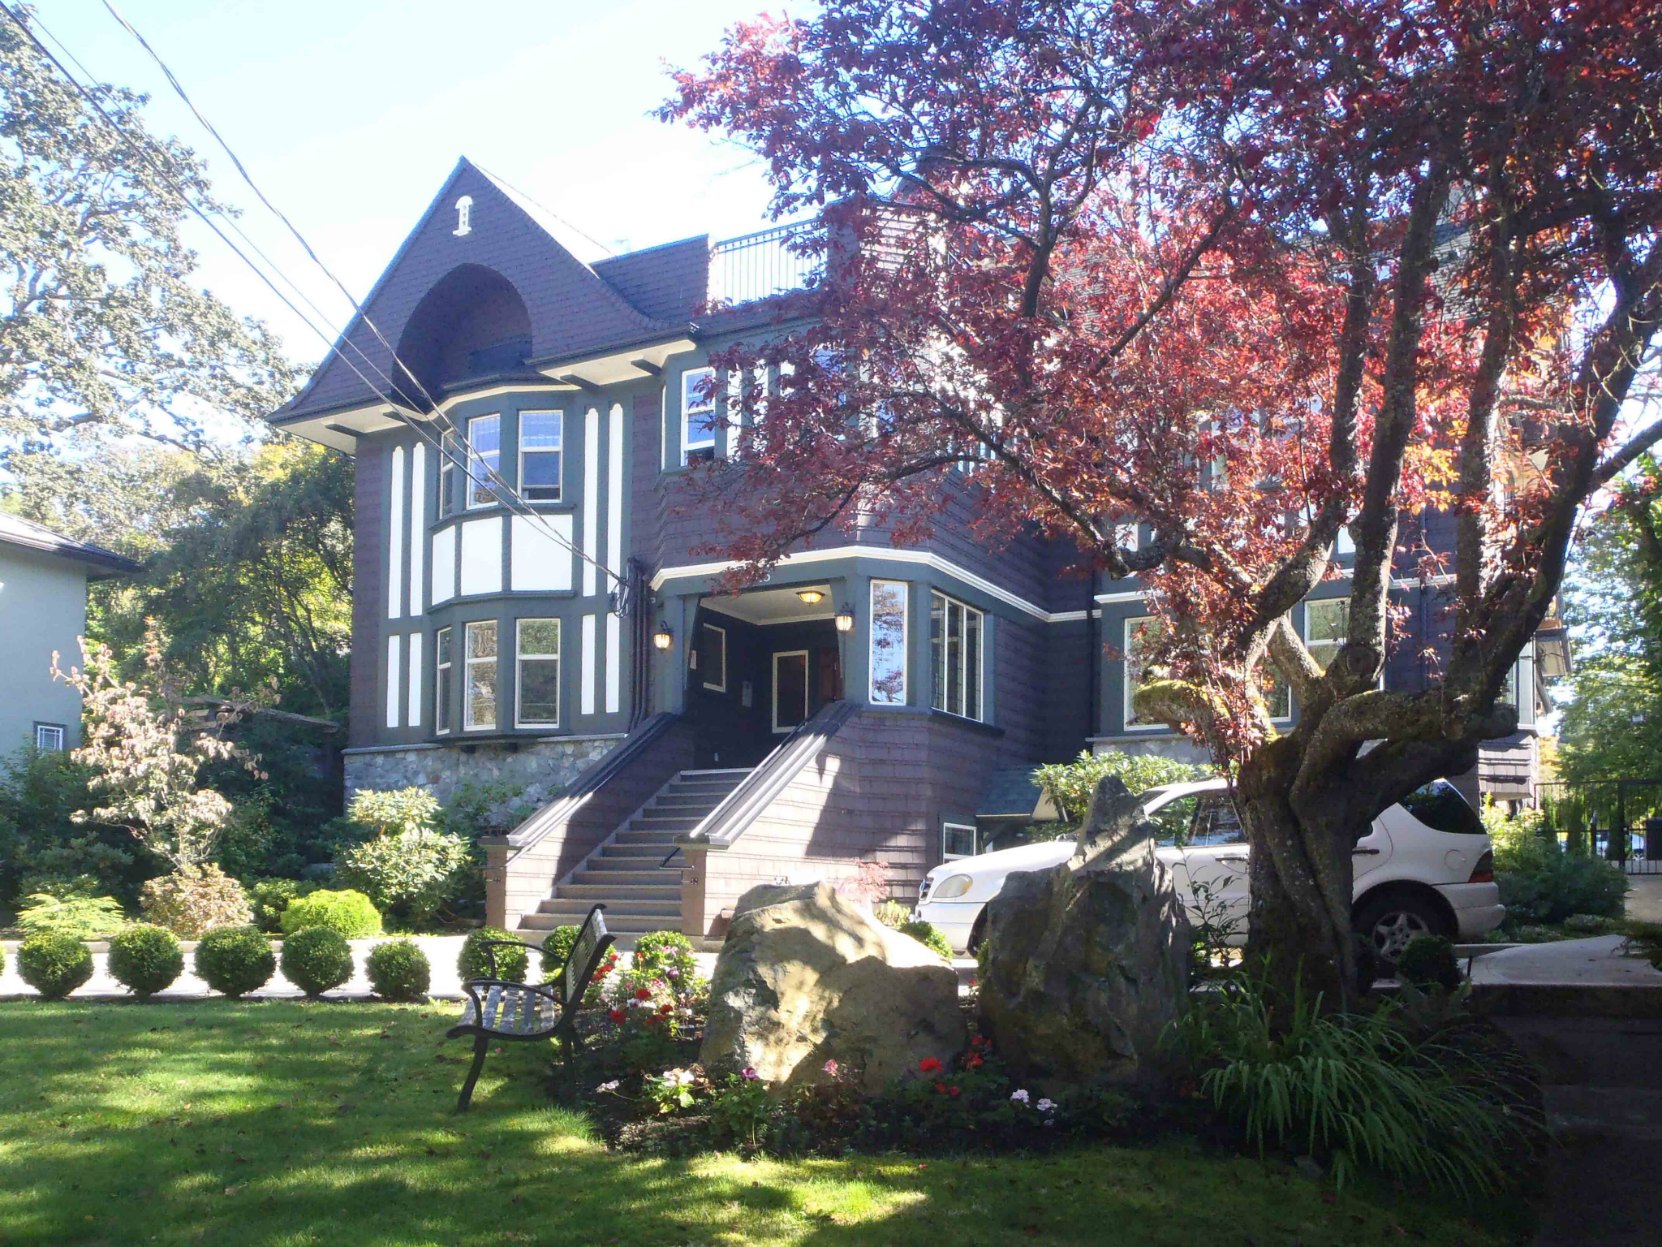 1015 Moss Street, built in 1912-13 by architects Percy Leonard James and Douglas James for Dr. James Helmcken and Ethel Helmcken